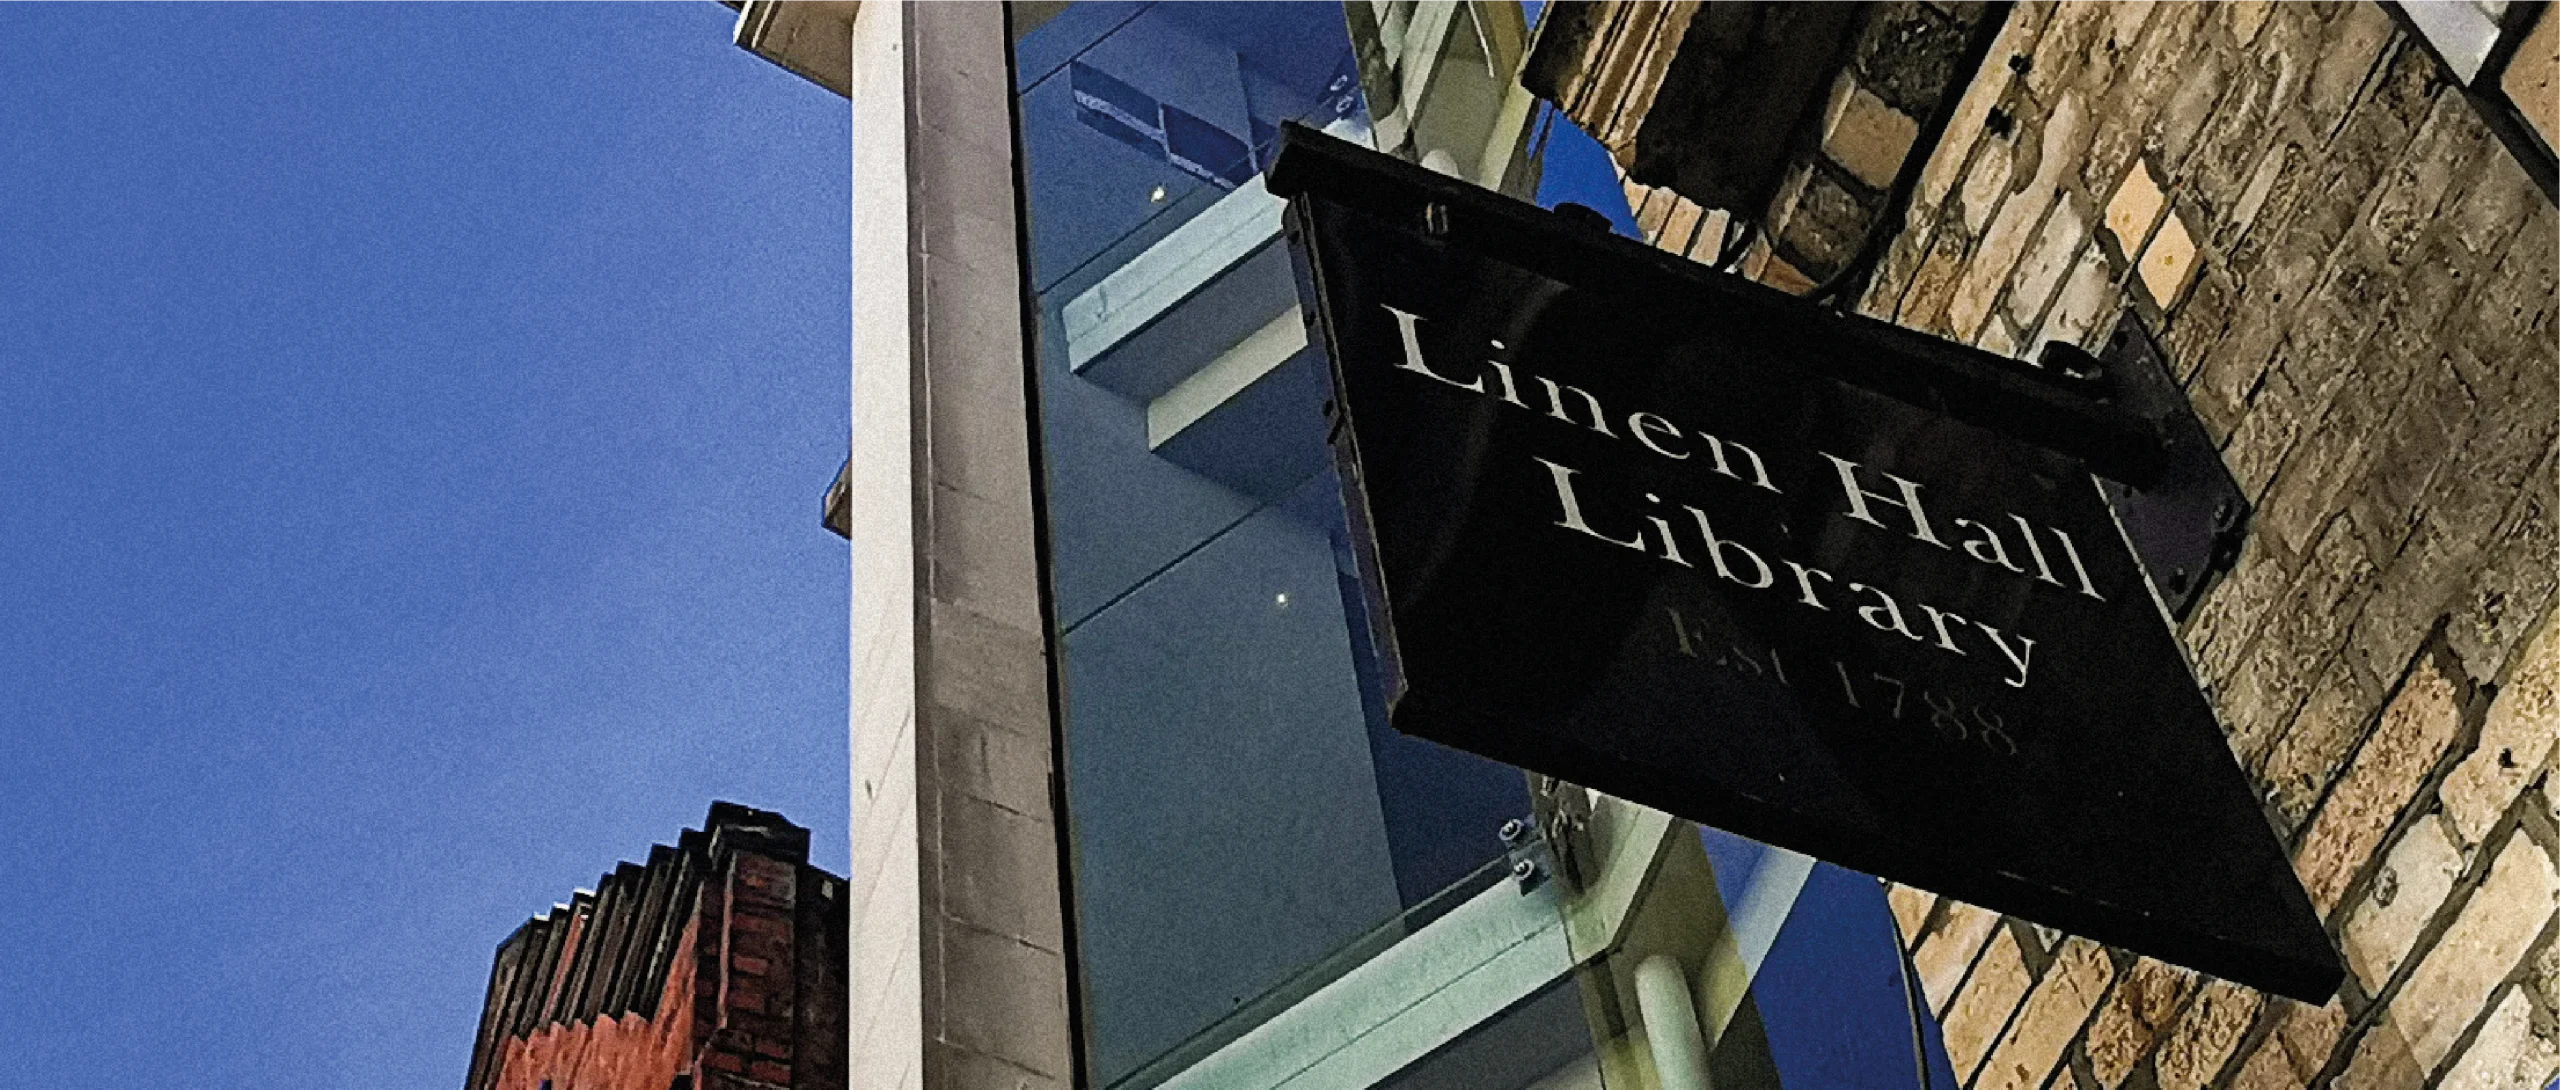 Linen Hall Library